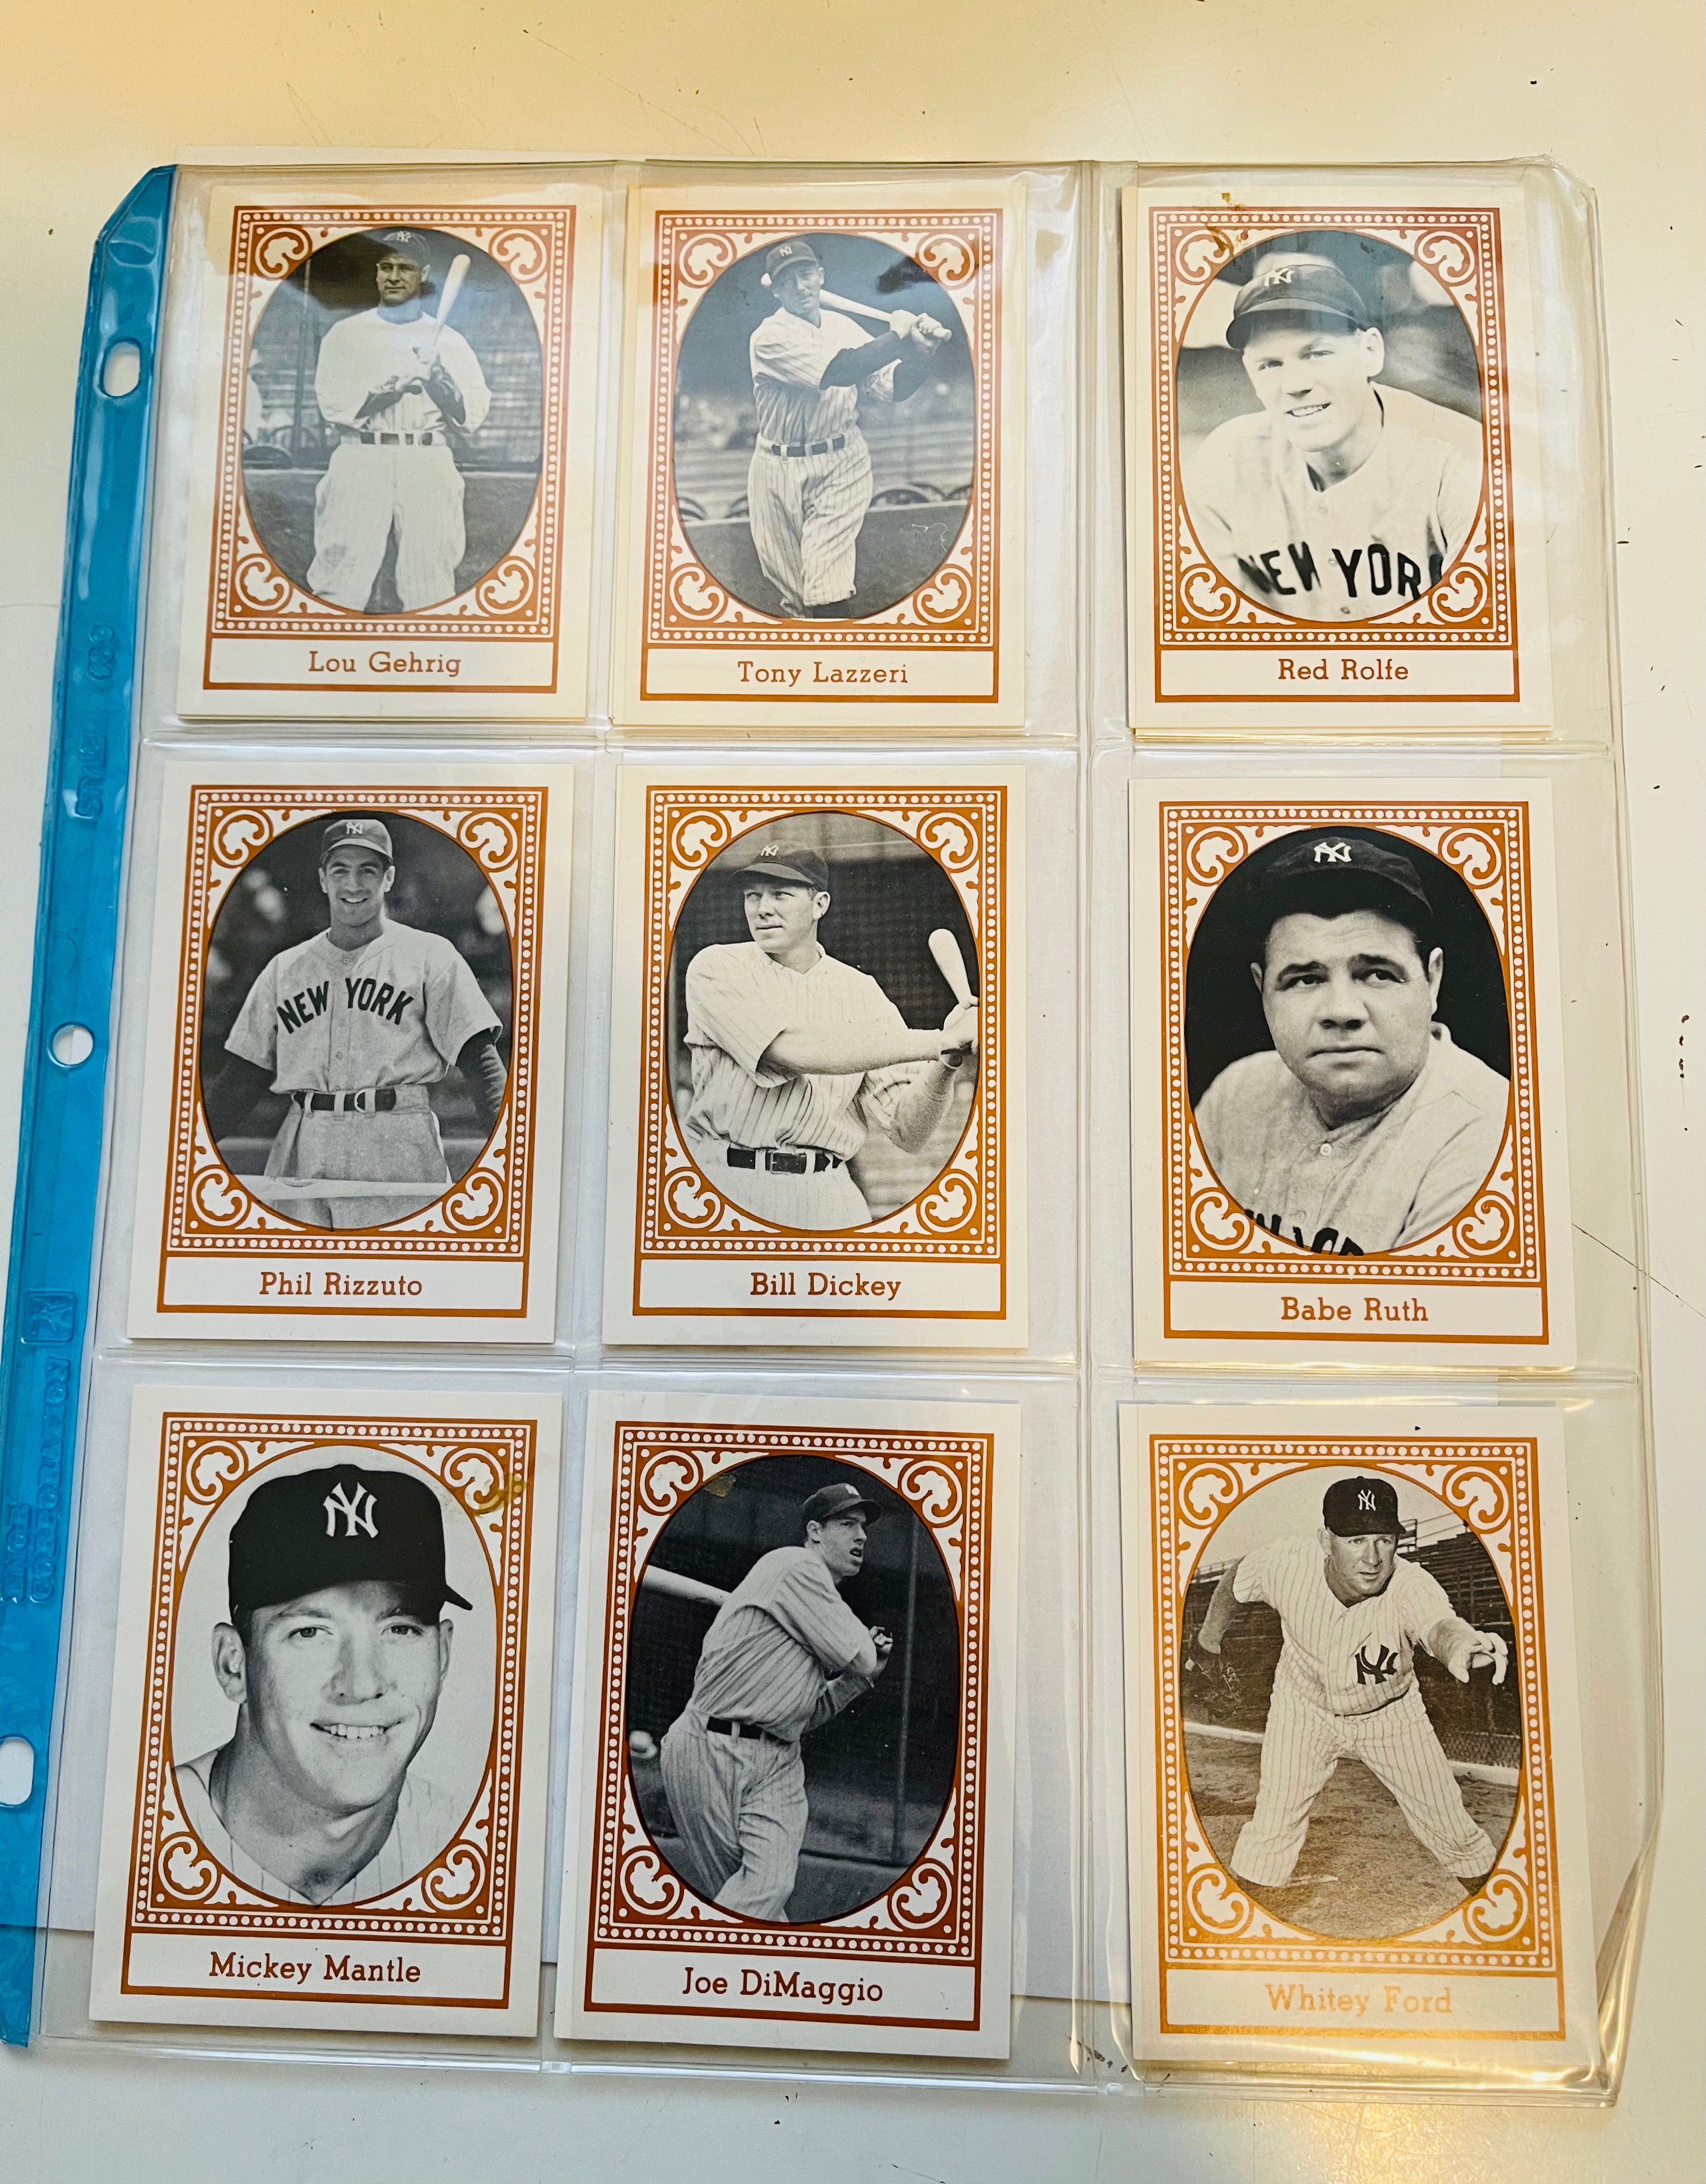 1980 New York Yankees all time greats card set